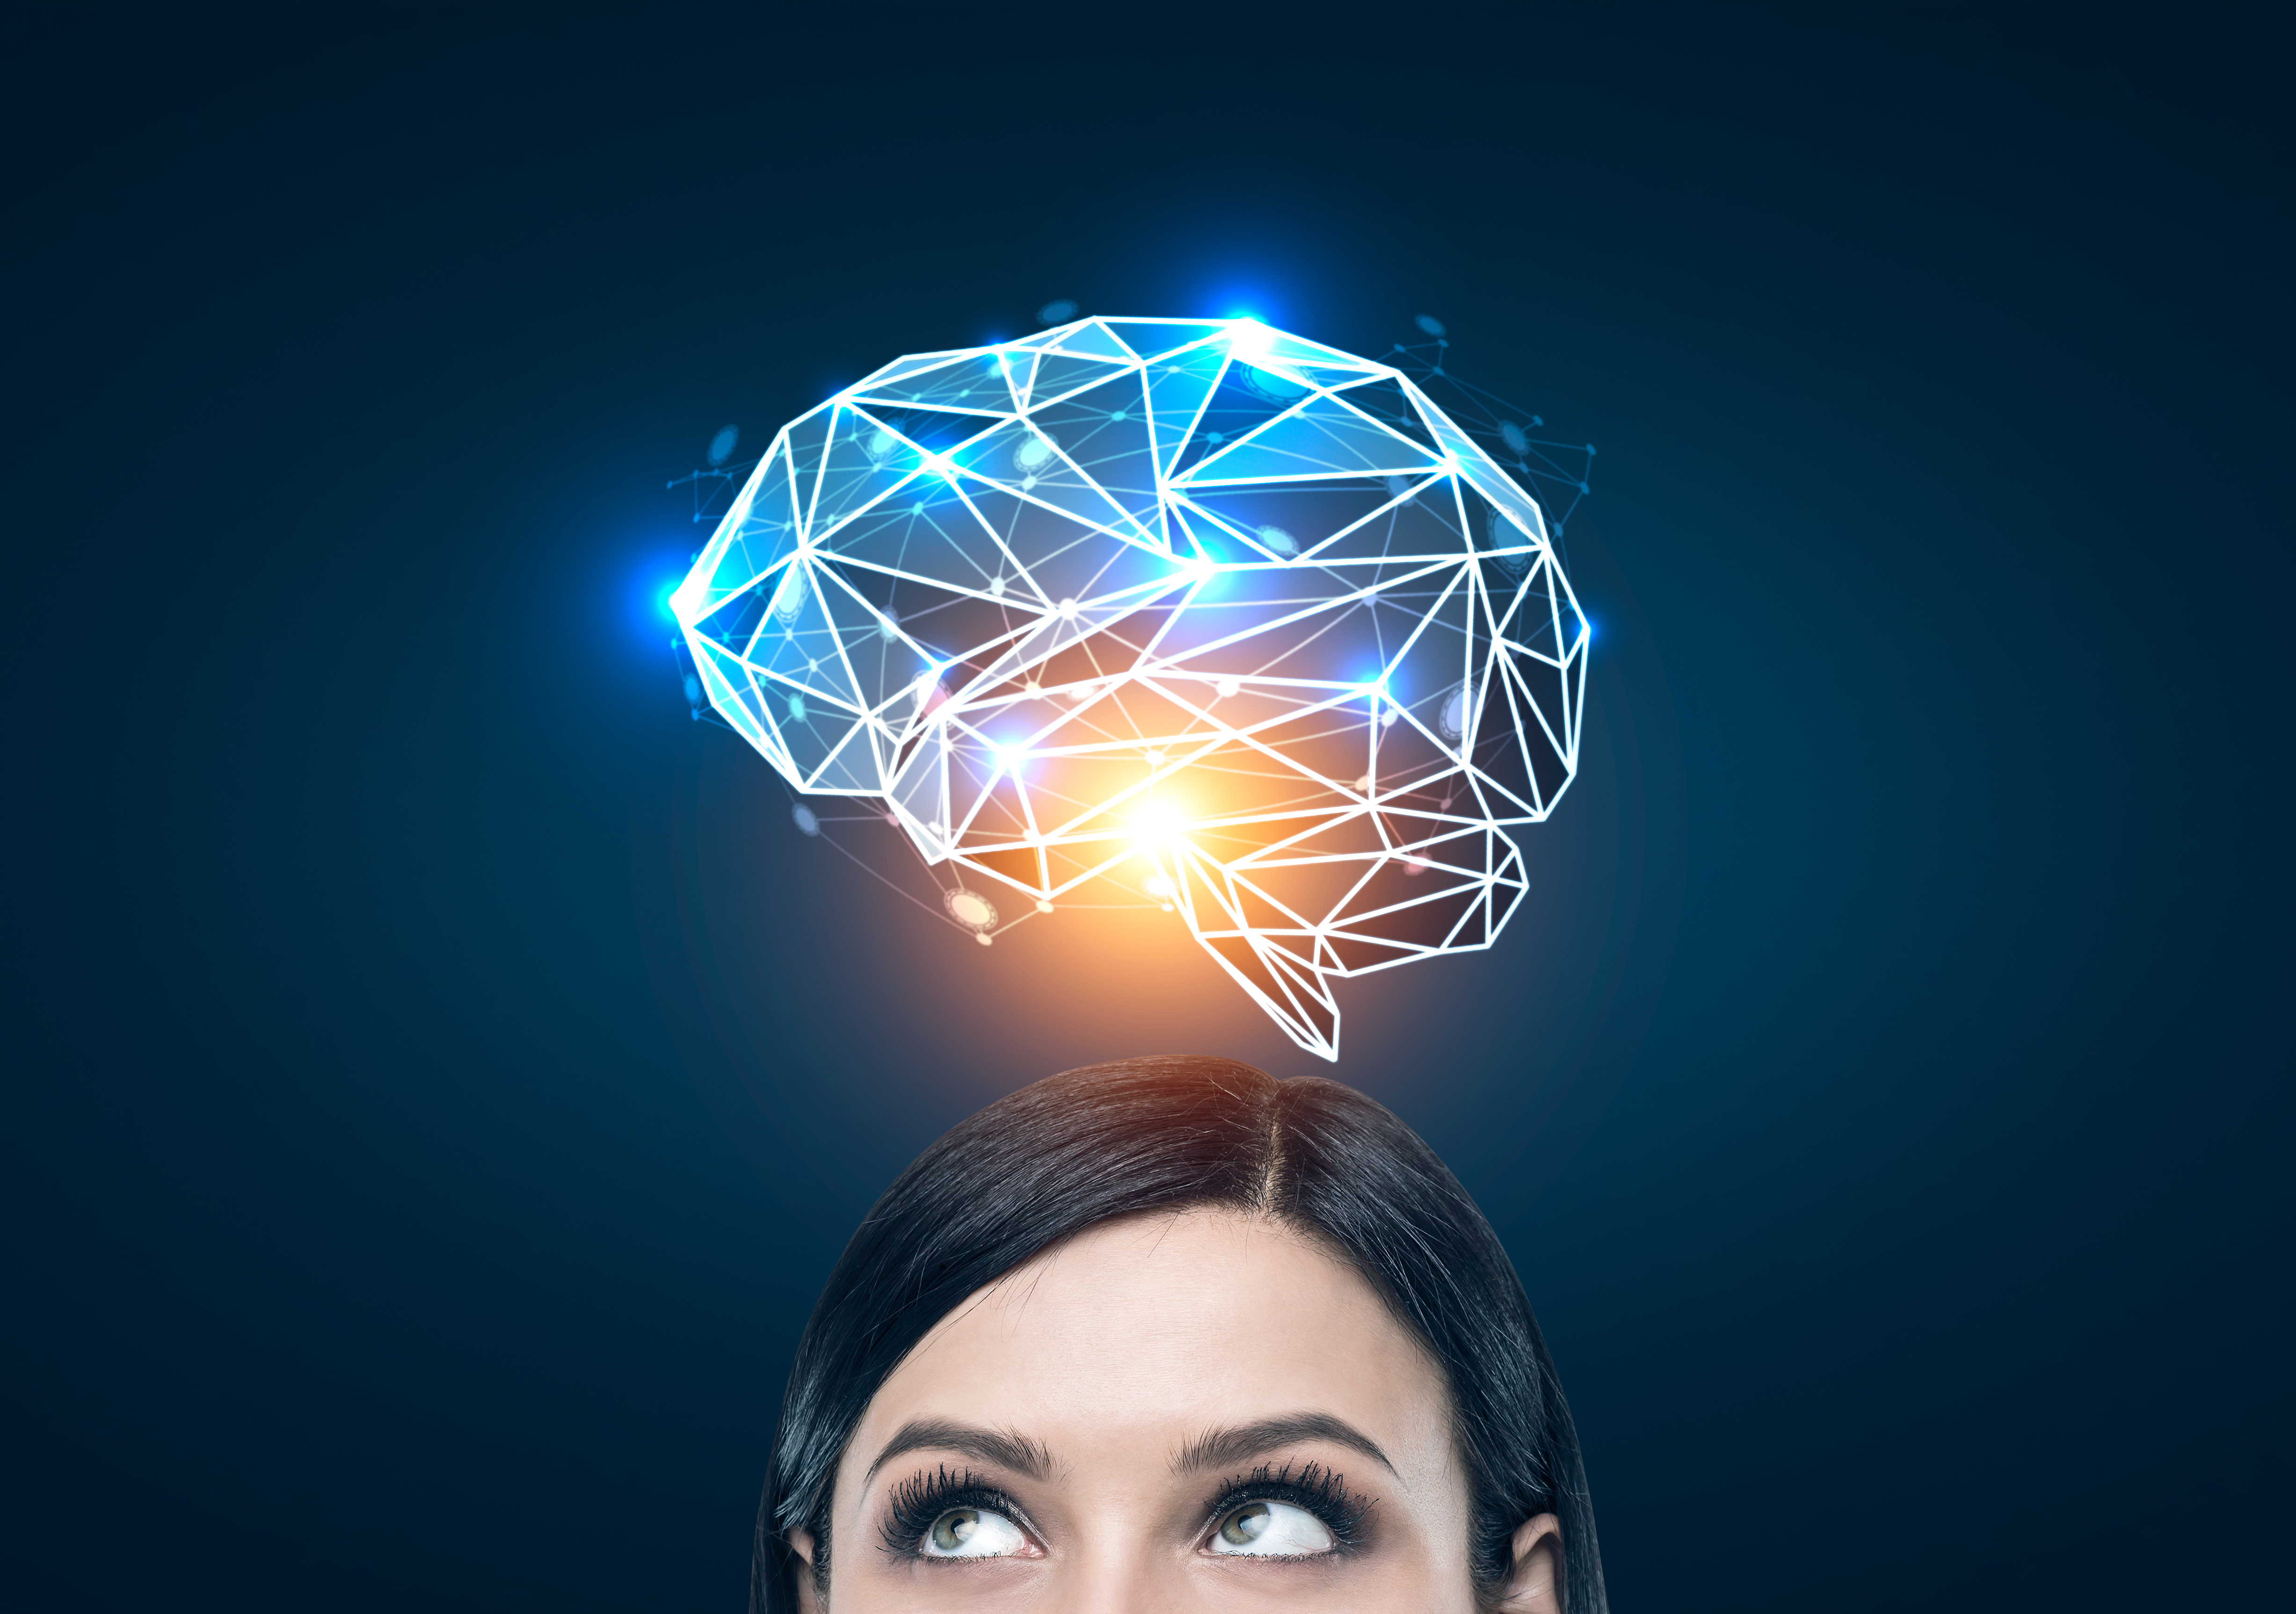 50 Brain Facts To Light Up Your Mind - Facts.net